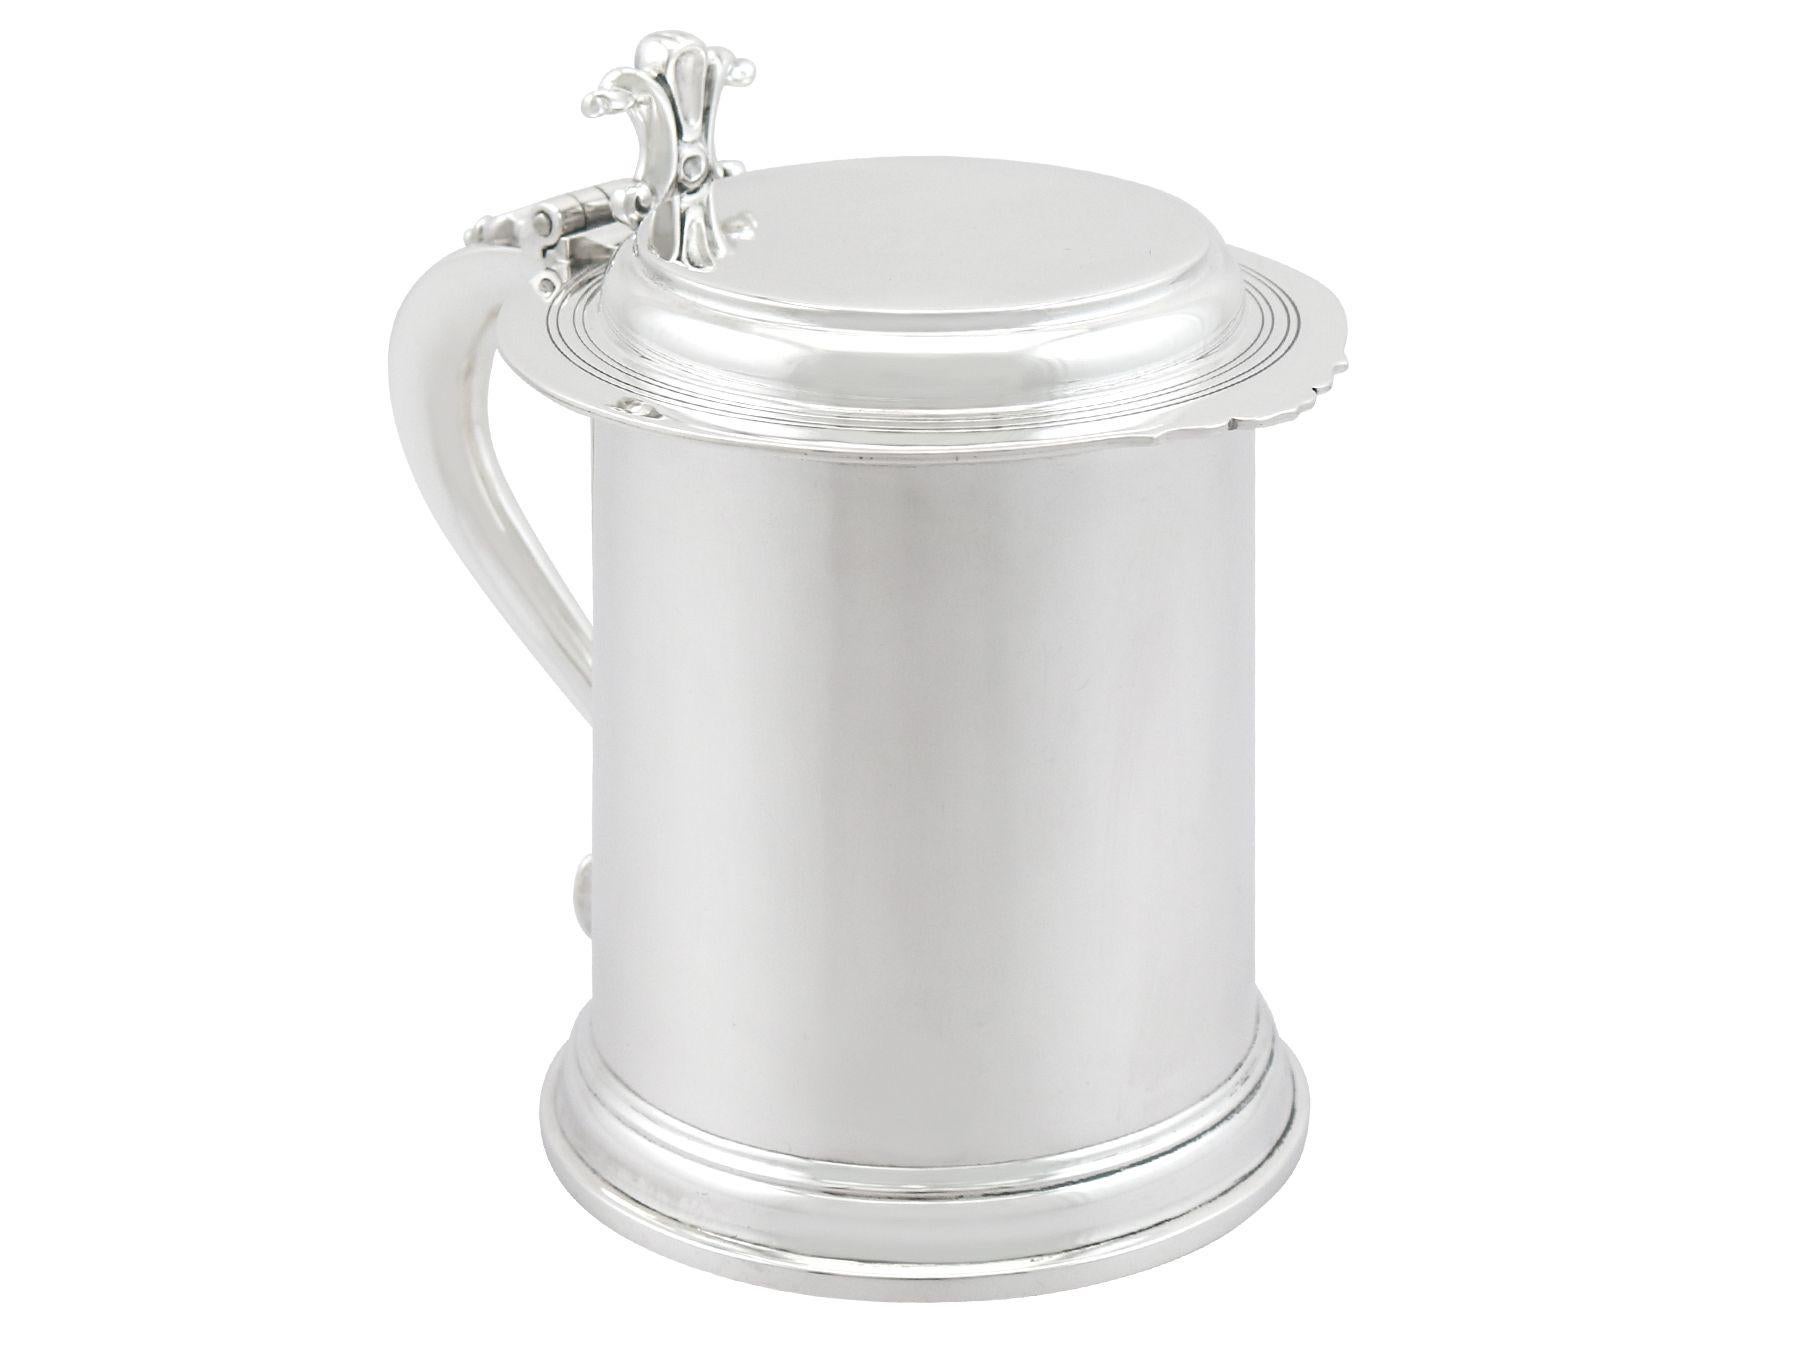 An exceptional, fine and impressive antique George V English sterling silver flat topped tankard made by Edward Barnard & Sons Ltd; part of our wine and drink related silverware collection.

This exceptional, fine and impressive antique silver